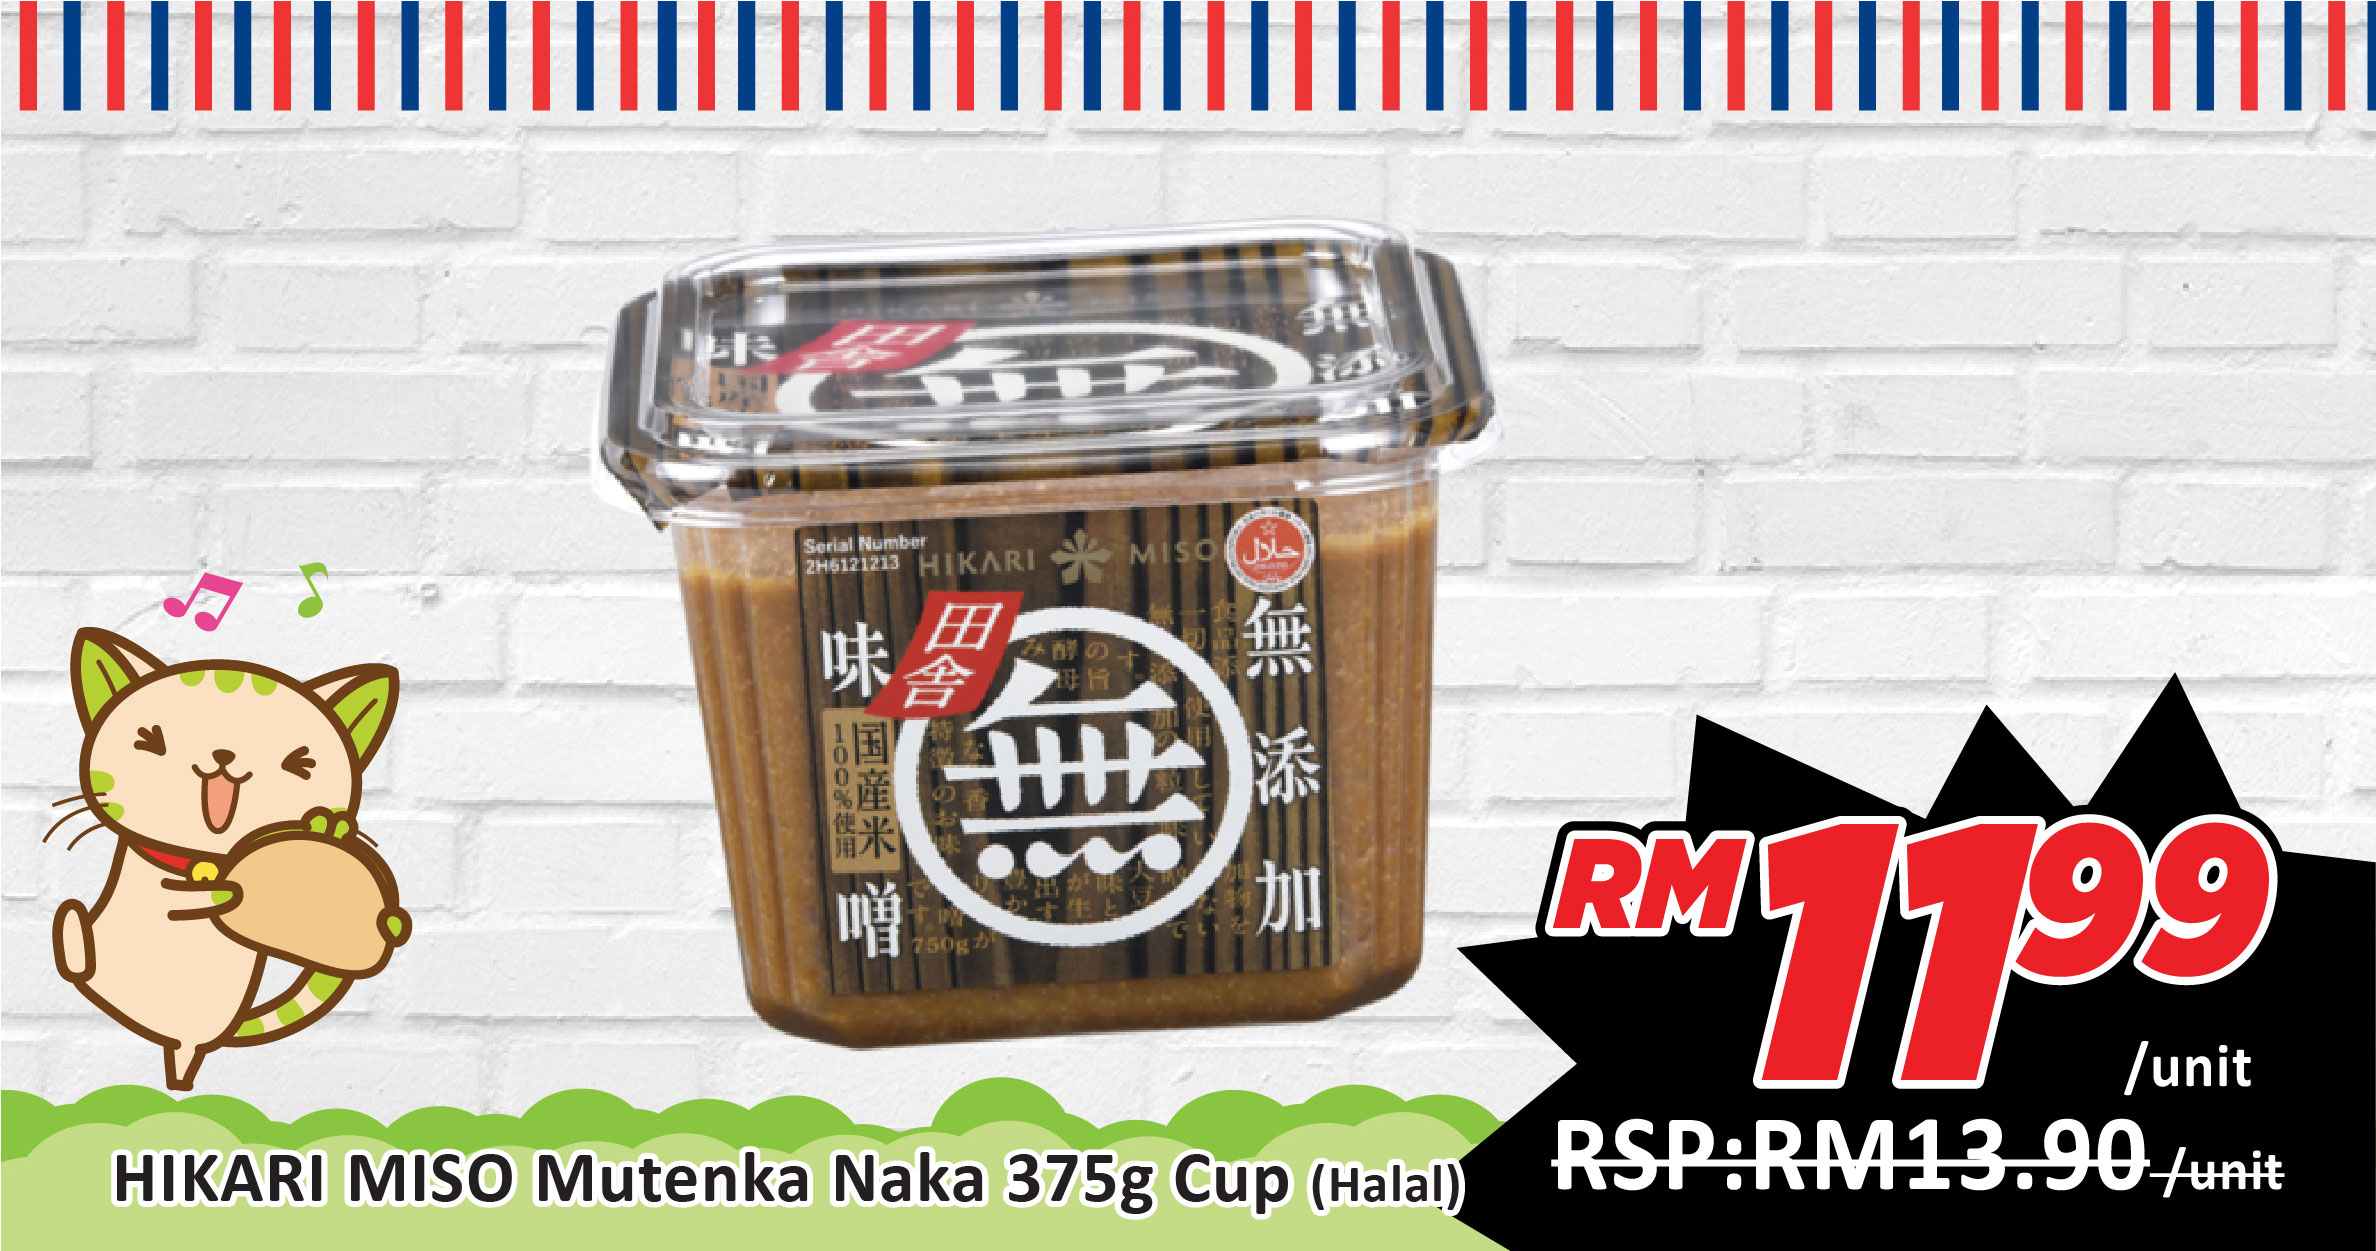 https://www.alpropharmacy.com/oneclick/product/hikari-miso-mutenka-inaka-375g-cup-halal-375g-contain-soybeans-rich-aroma/